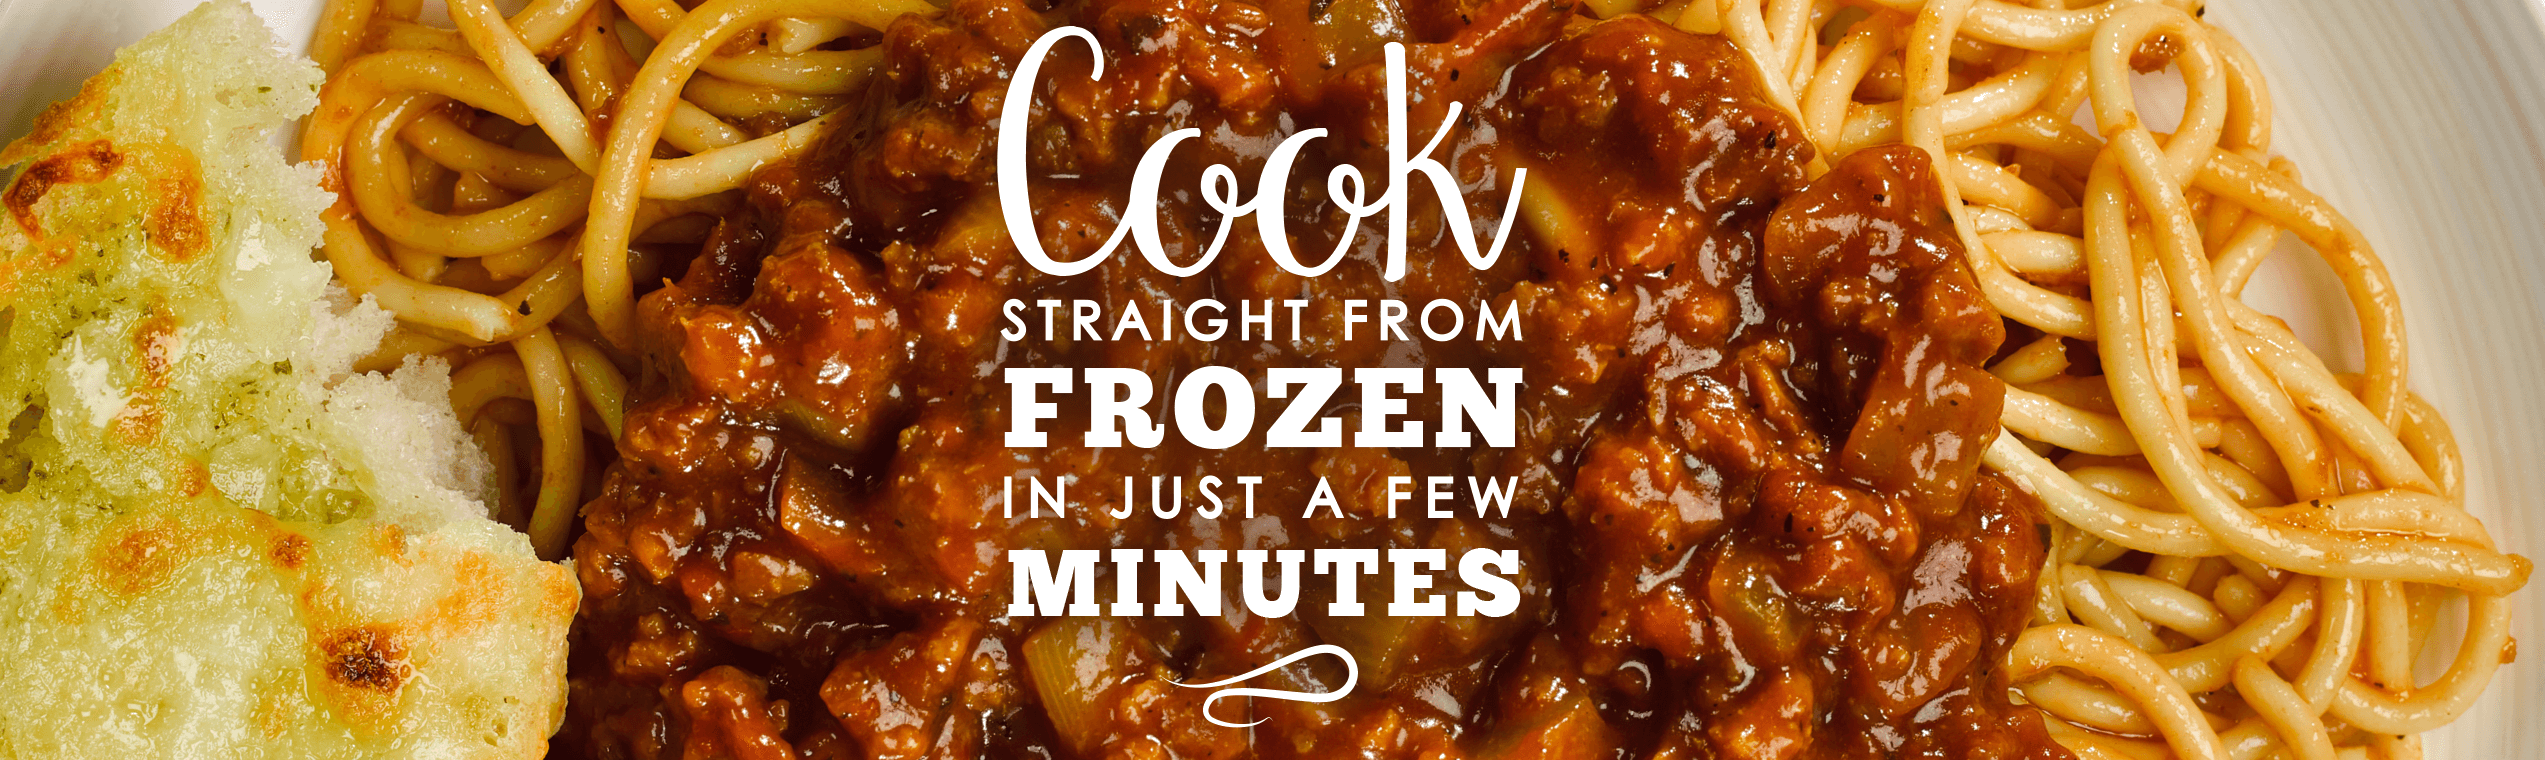 Cook Straight From Frozen In Just A Few Minutes